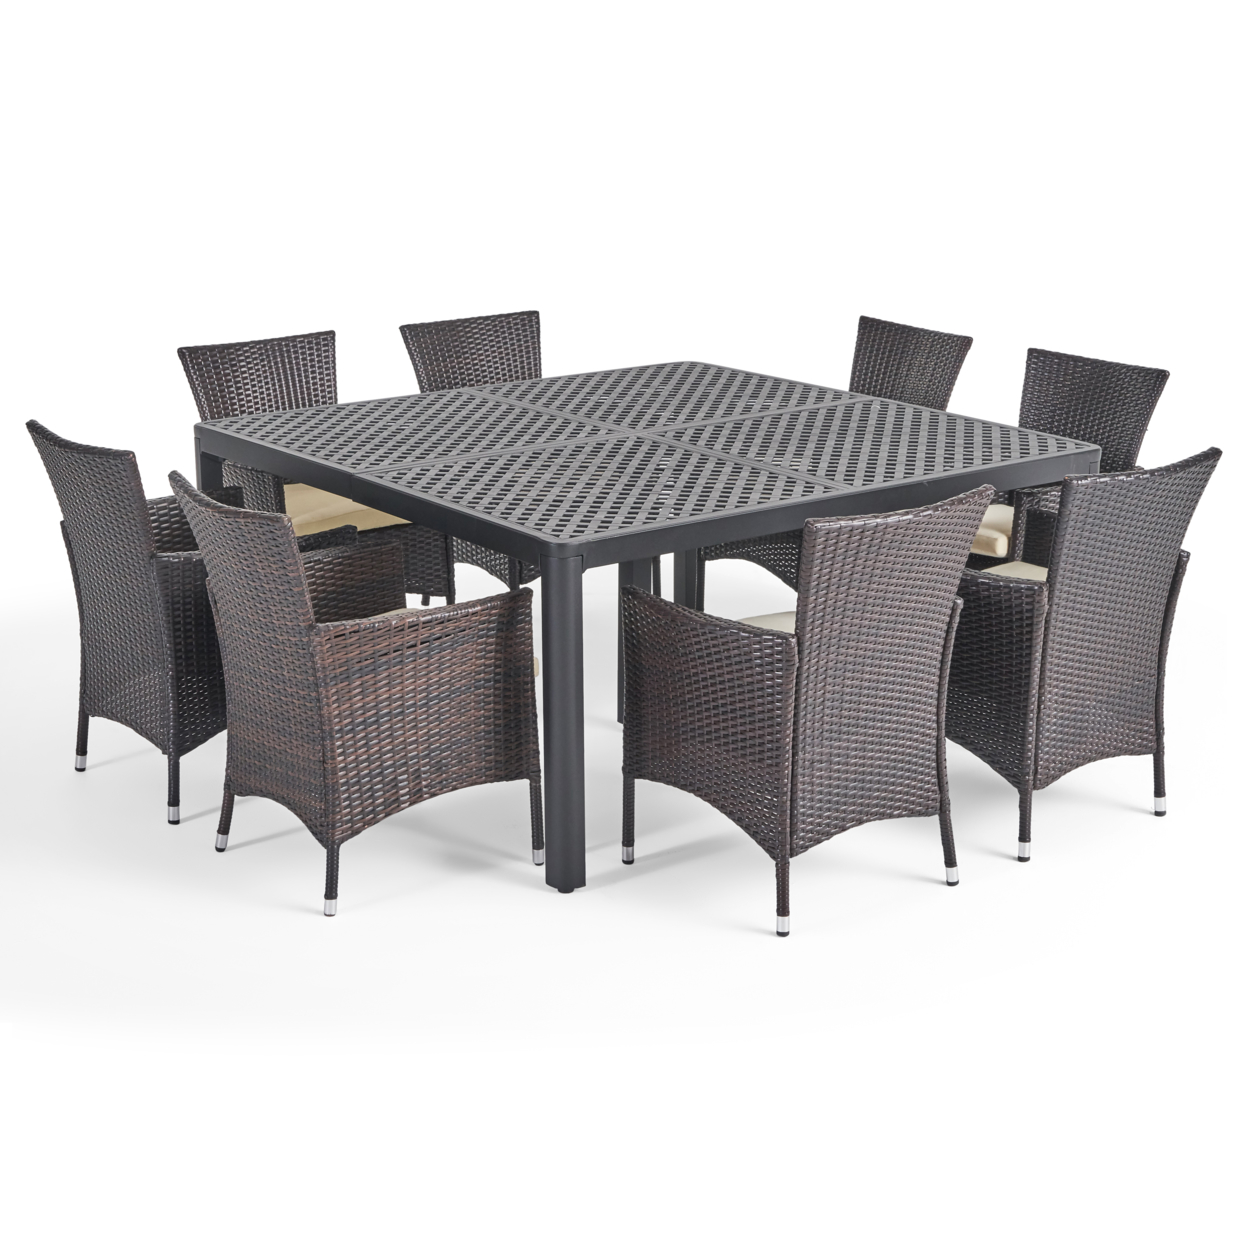 Nelly Outdoor Aluminum And Wicker 8 Seater Dining Set - Gloss Black + Multibrown + Beige